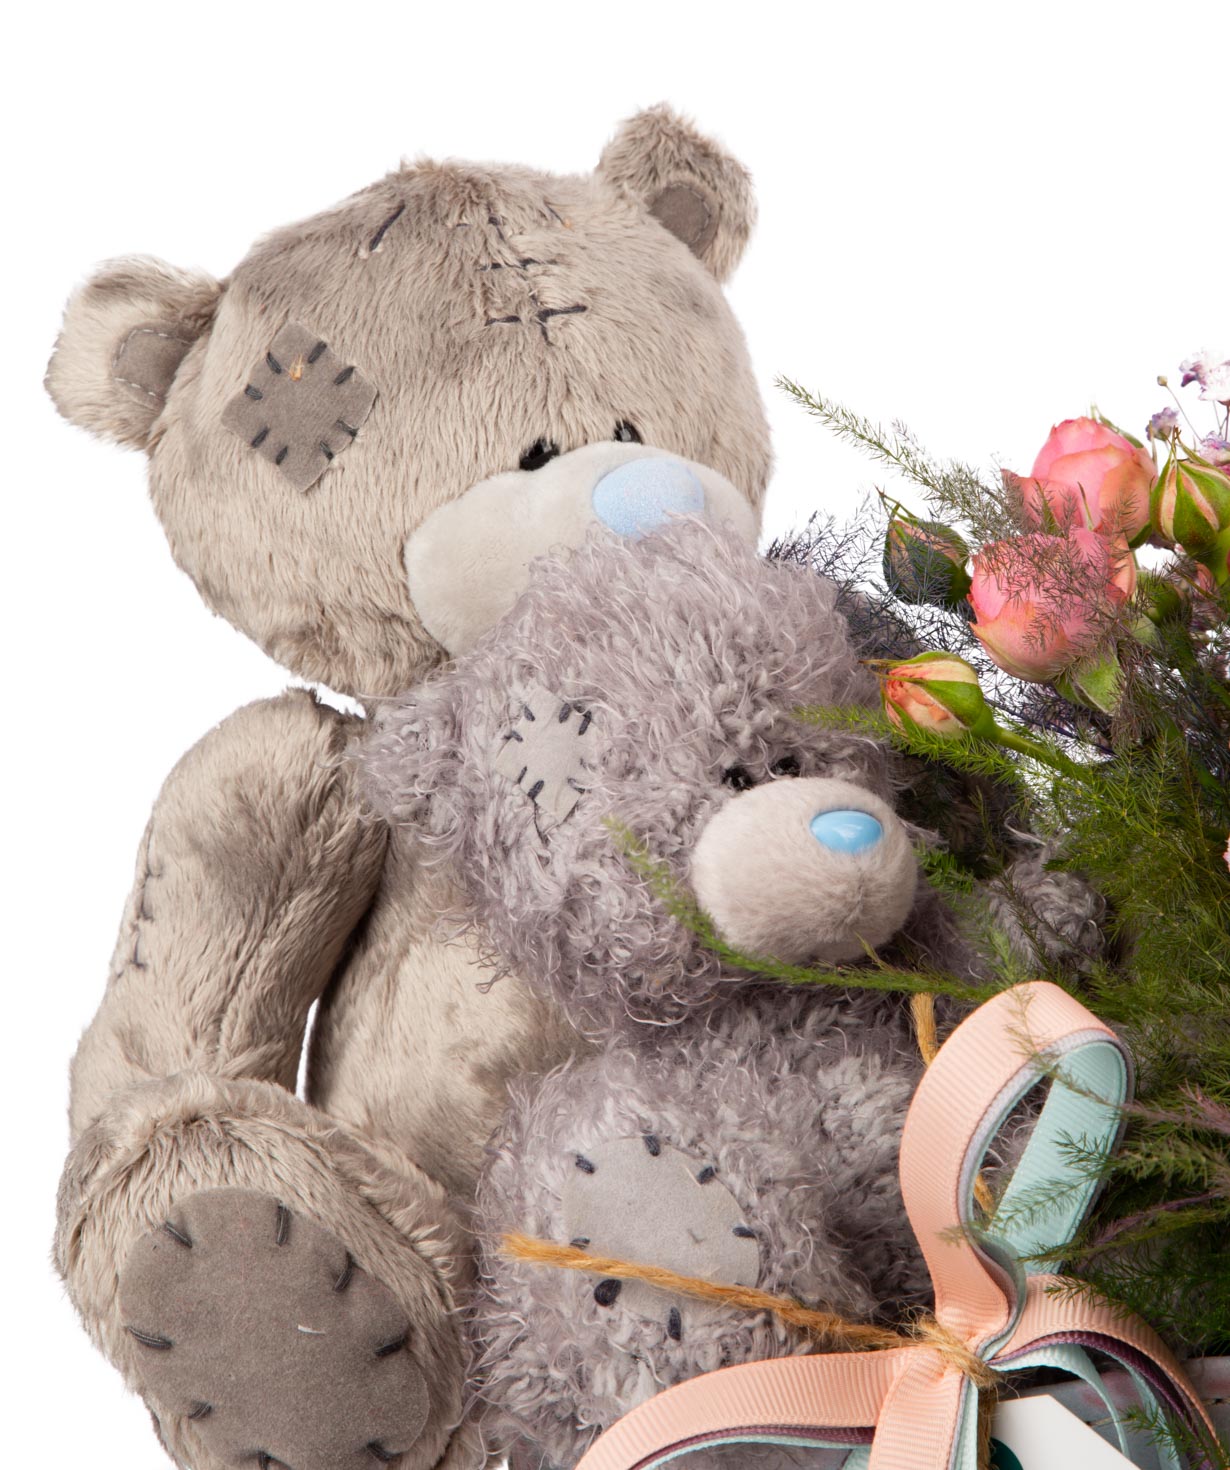 Composition `Enns` with soft toys and flowers